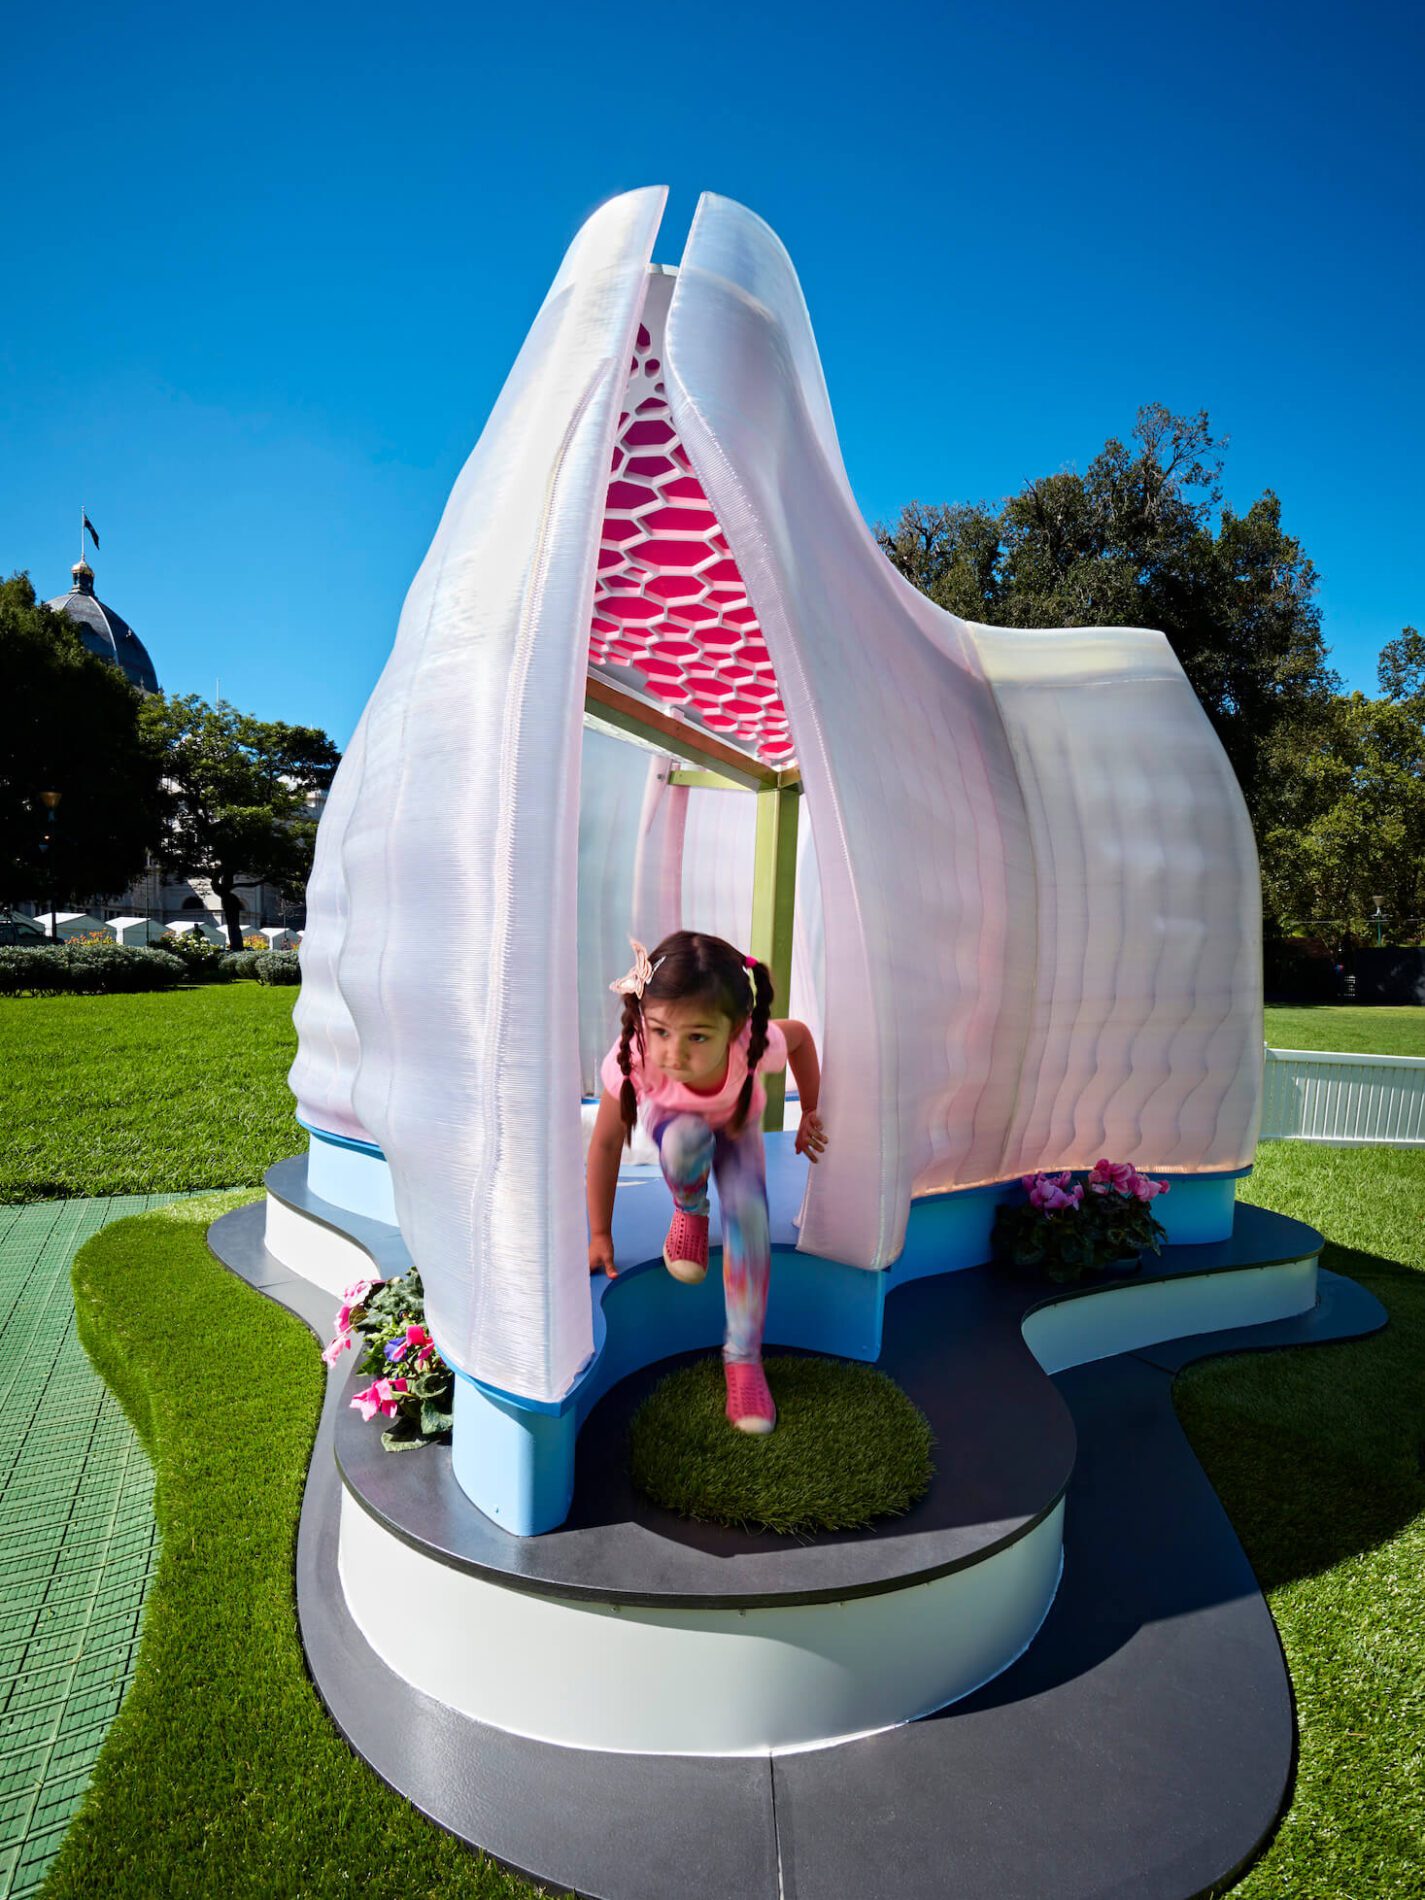 Child emerges from organic pink shaped cubby structure